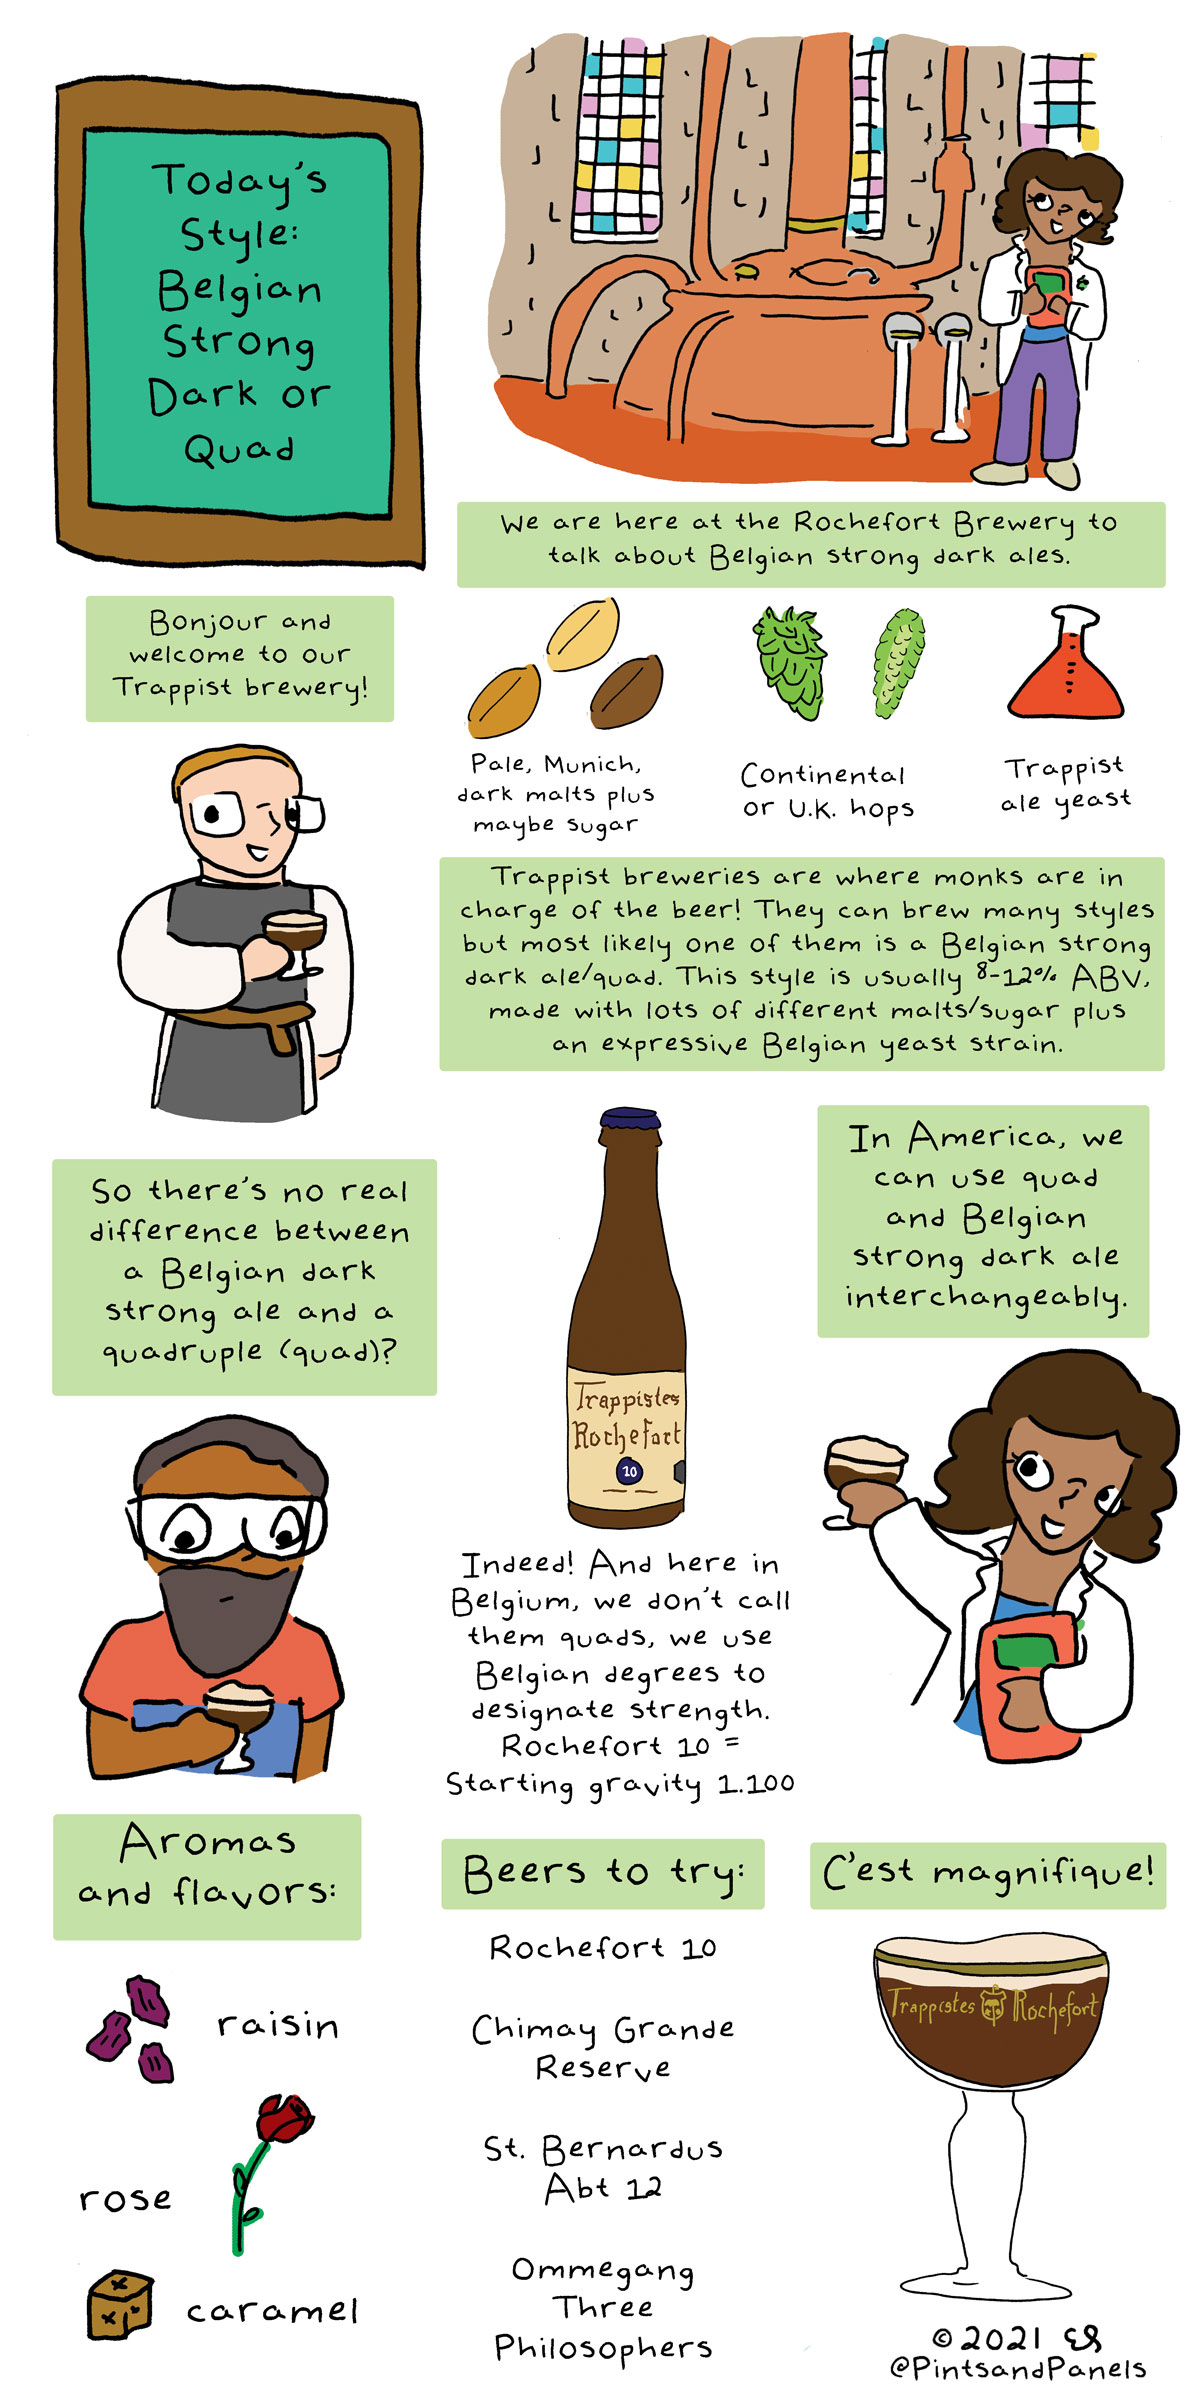 This comic explains the history of Belgian strong dark and quad ale